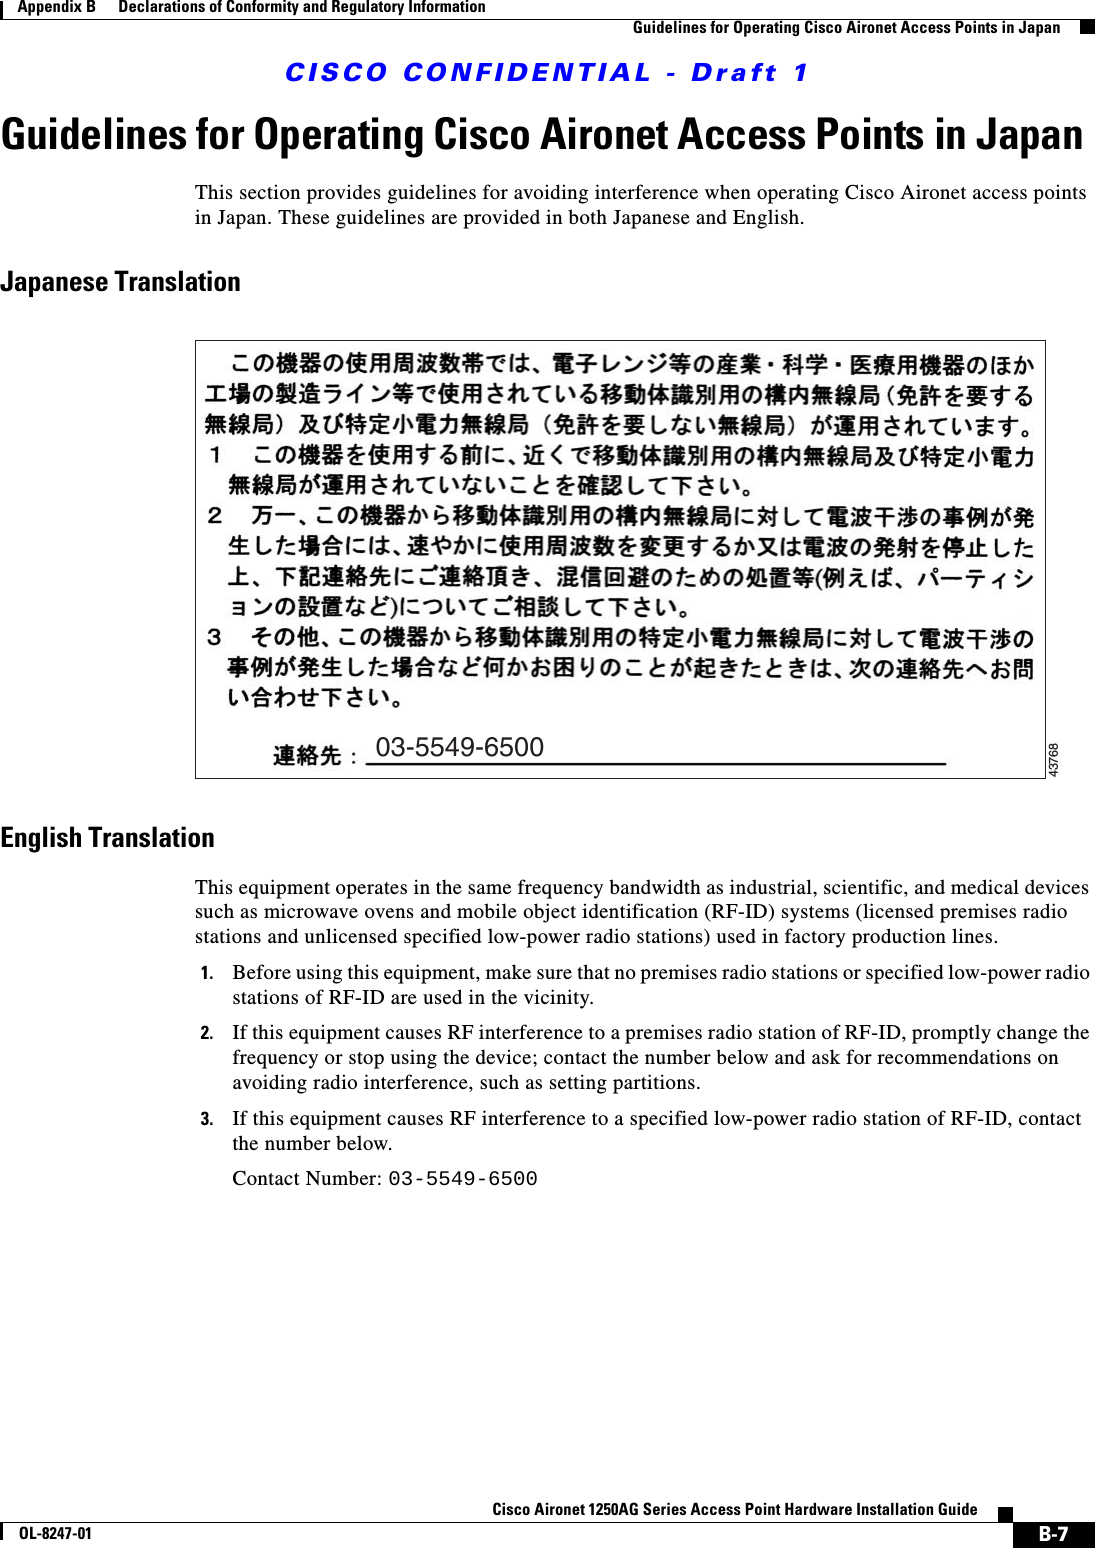 CISCO CONFIDENTIAL - Draft 1B-7Cisco Aironet 1250AG Series Access Point Hardware Installation GuideOL-8247-01Appendix B      Declarations of Conformity and Regulatory InformationGuidelines for Operating Cisco Aironet Access Points in JapanGuidelines for Operating Cisco Aironet Access Points in JapanThis section provides guidelines for avoiding interference when operating Cisco Aironet access points in Japan. These guidelines are provided in both Japanese and English.Japanese TranslationEnglish TranslationThis equipment operates in the same frequency bandwidth as industrial, scientific, and medical devices such as microwave ovens and mobile object identification (RF-ID) systems (licensed premises radio stations and unlicensed specified low-power radio stations) used in factory production lines.1. Before using this equipment, make sure that no premises radio stations or specified low-power radio stations of RF-ID are used in the vicinity.2. If this equipment causes RF interference to a premises radio station of RF-ID, promptly change the frequency or stop using the device; contact the number below and ask for recommendations on avoiding radio interference, such as setting partitions.3. If this equipment causes RF interference to a specified low-power radio station of RF-ID, contact the number below.Contact Number: 03-5549-650003-5549-650043768